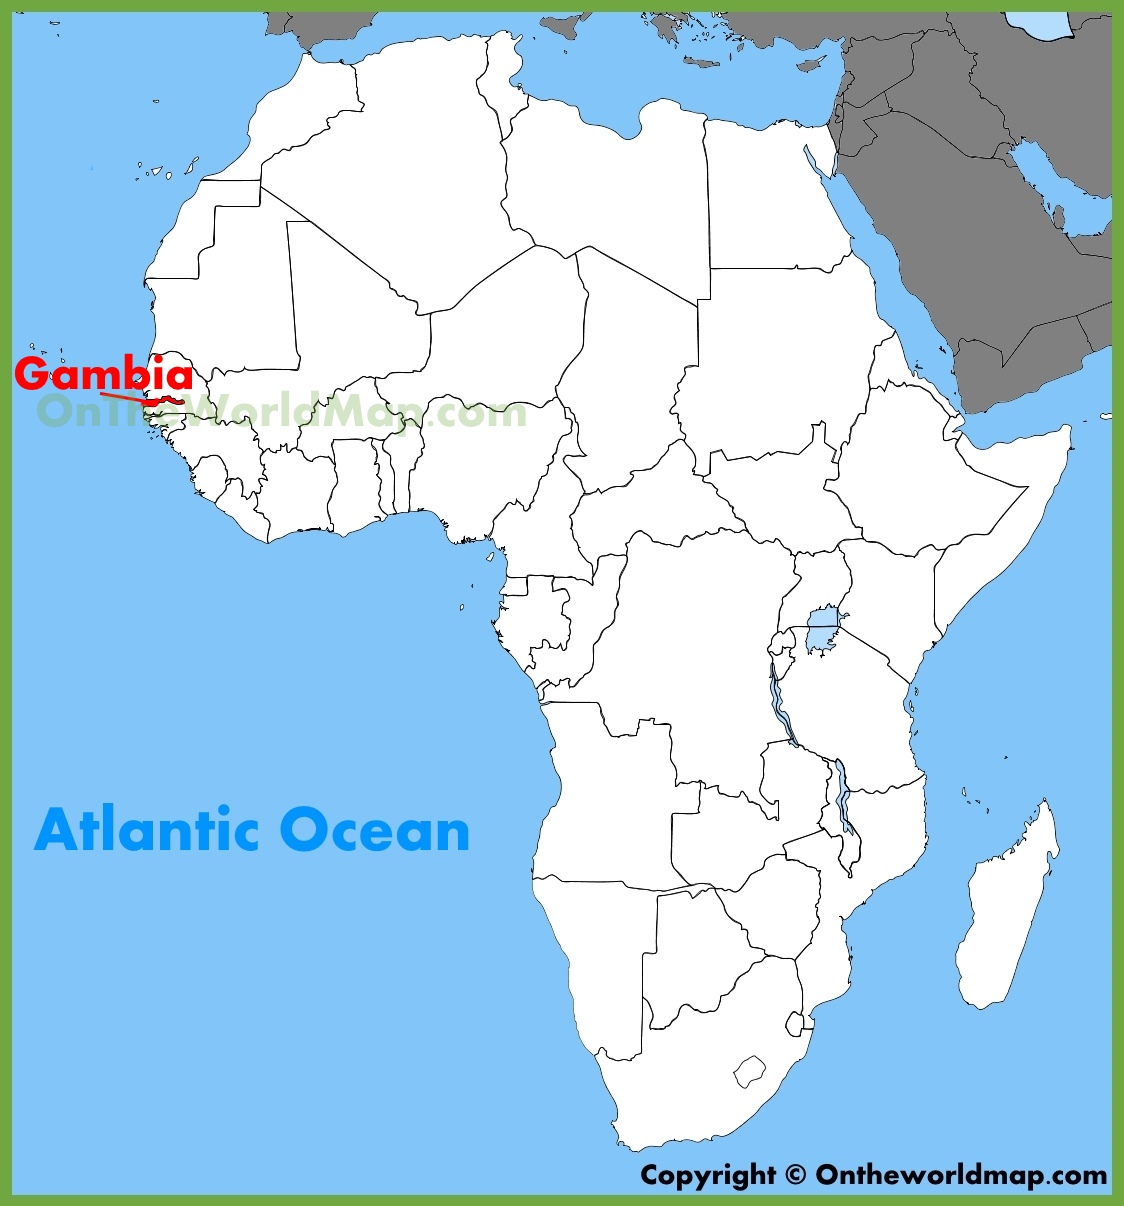 Gambia Location On The Africa Map